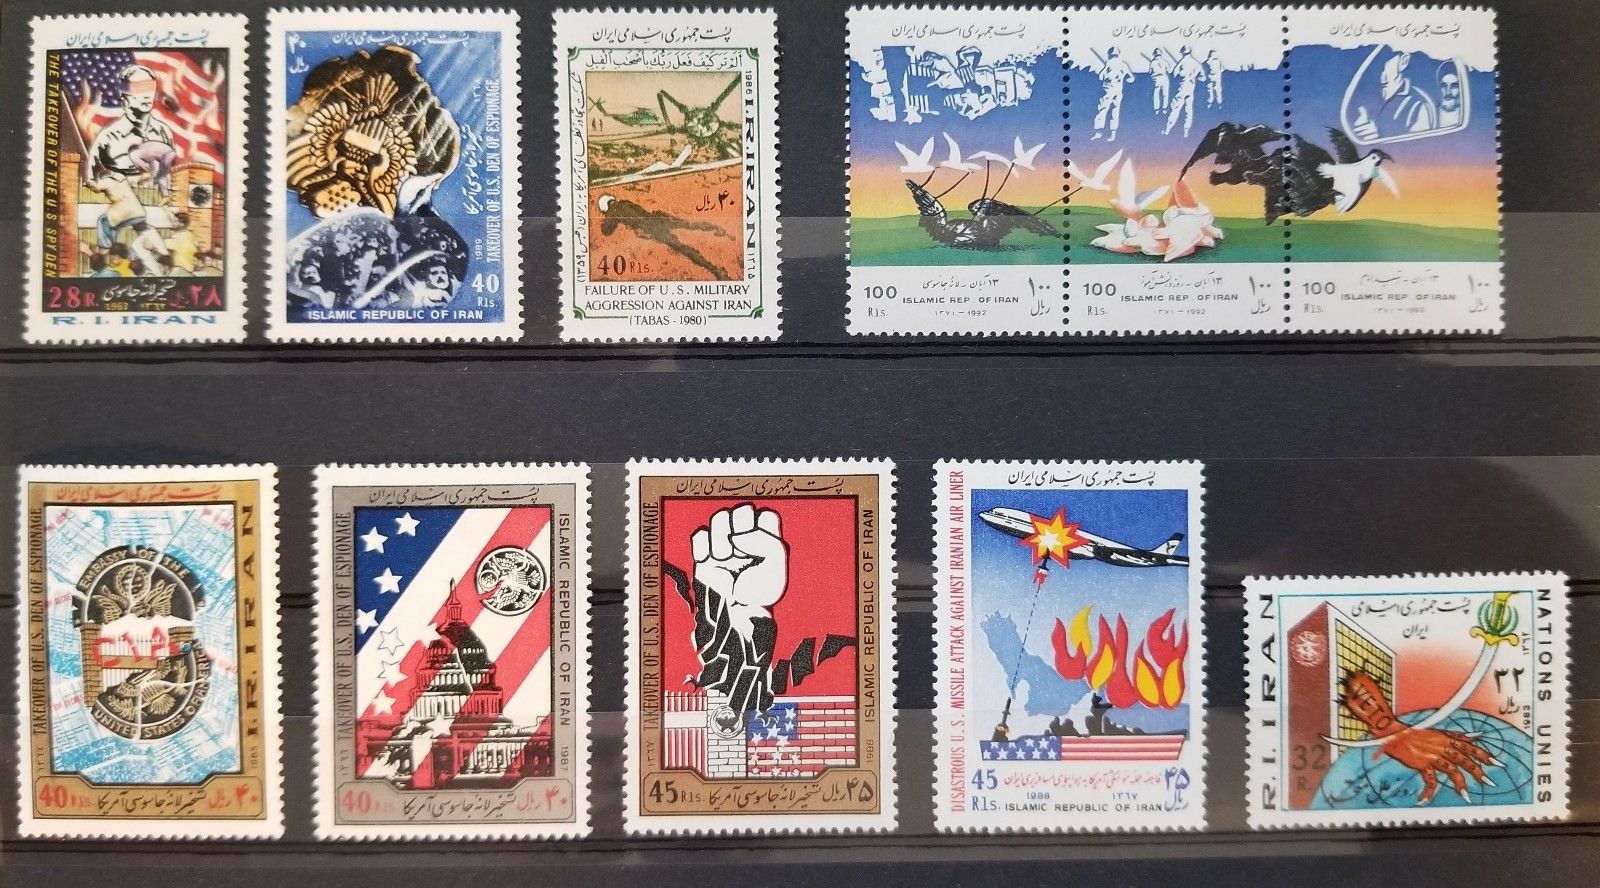 A selection of anti-American stamps released by Iran.